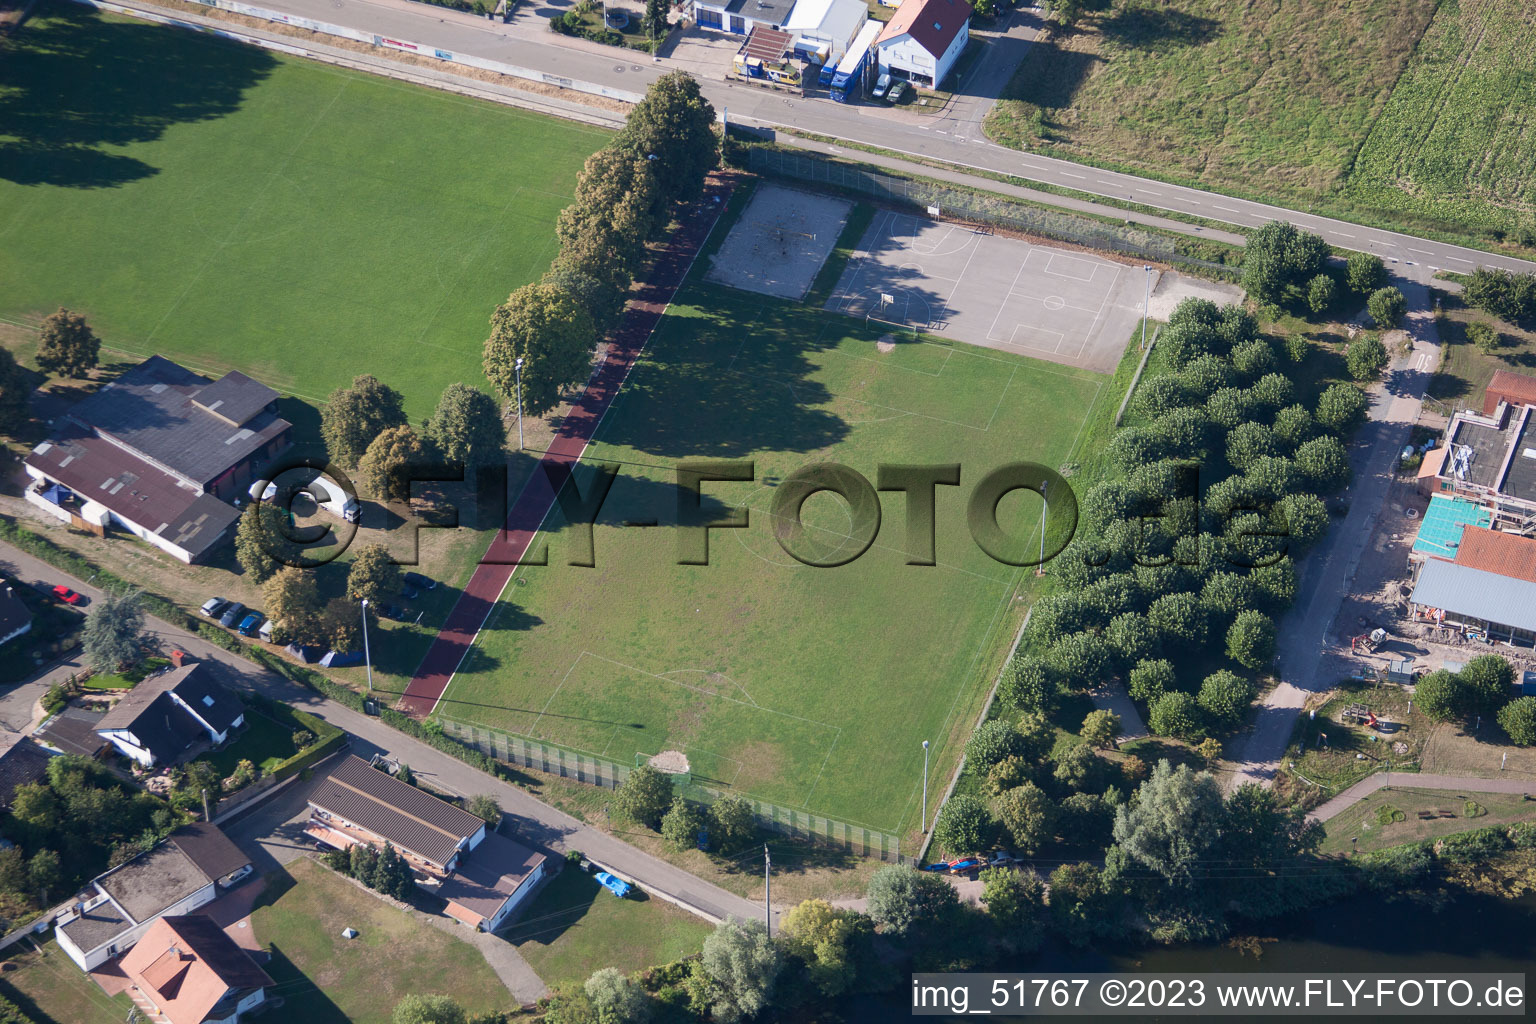 Aerial view of Sports fields in Leimersheim in the state Rhineland-Palatinate, Germany